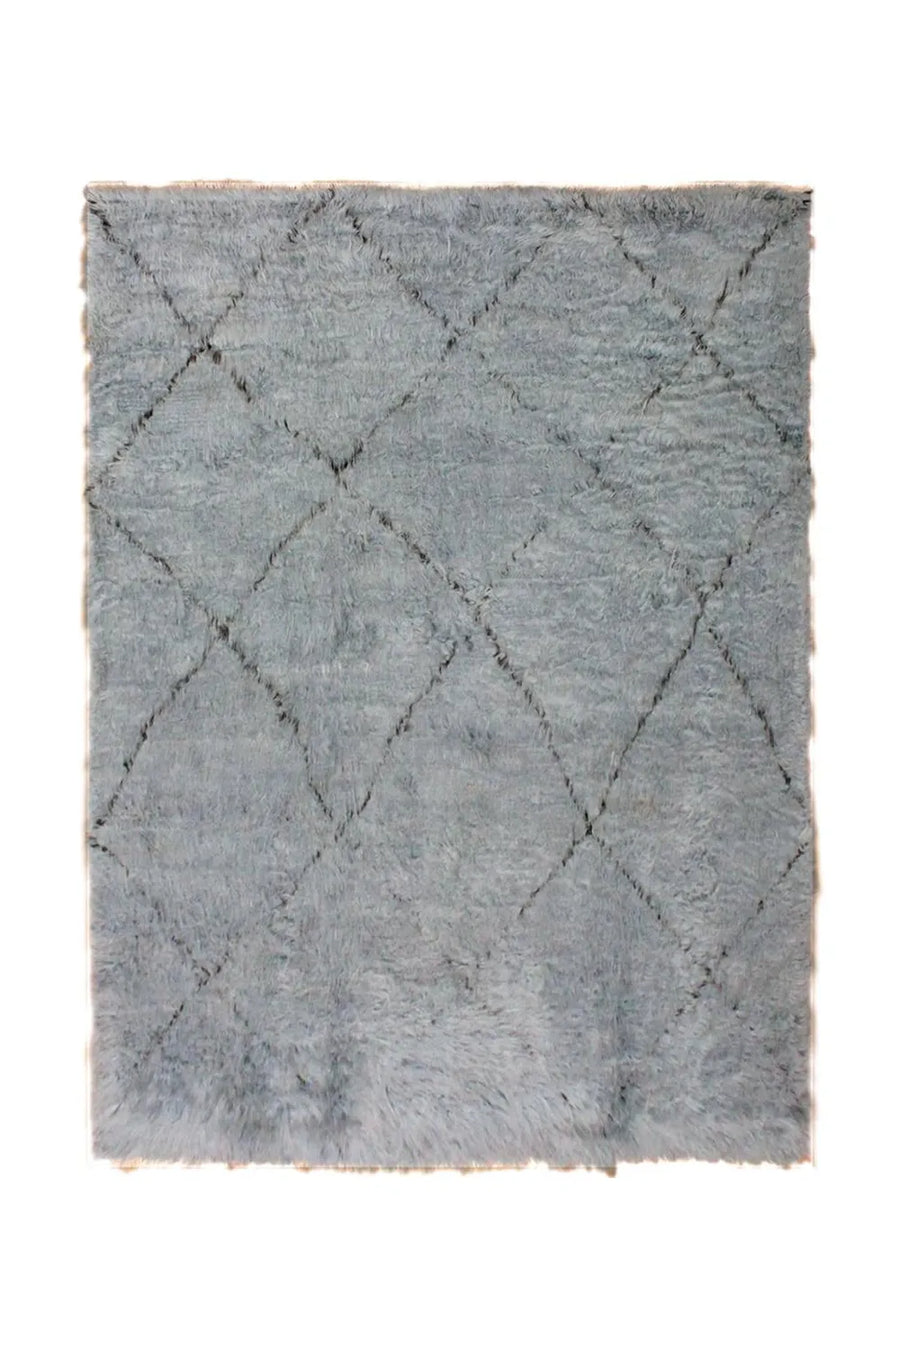 Plush gray shag rug with a subtle diamond pattern, adding a touch of luxury to any room.